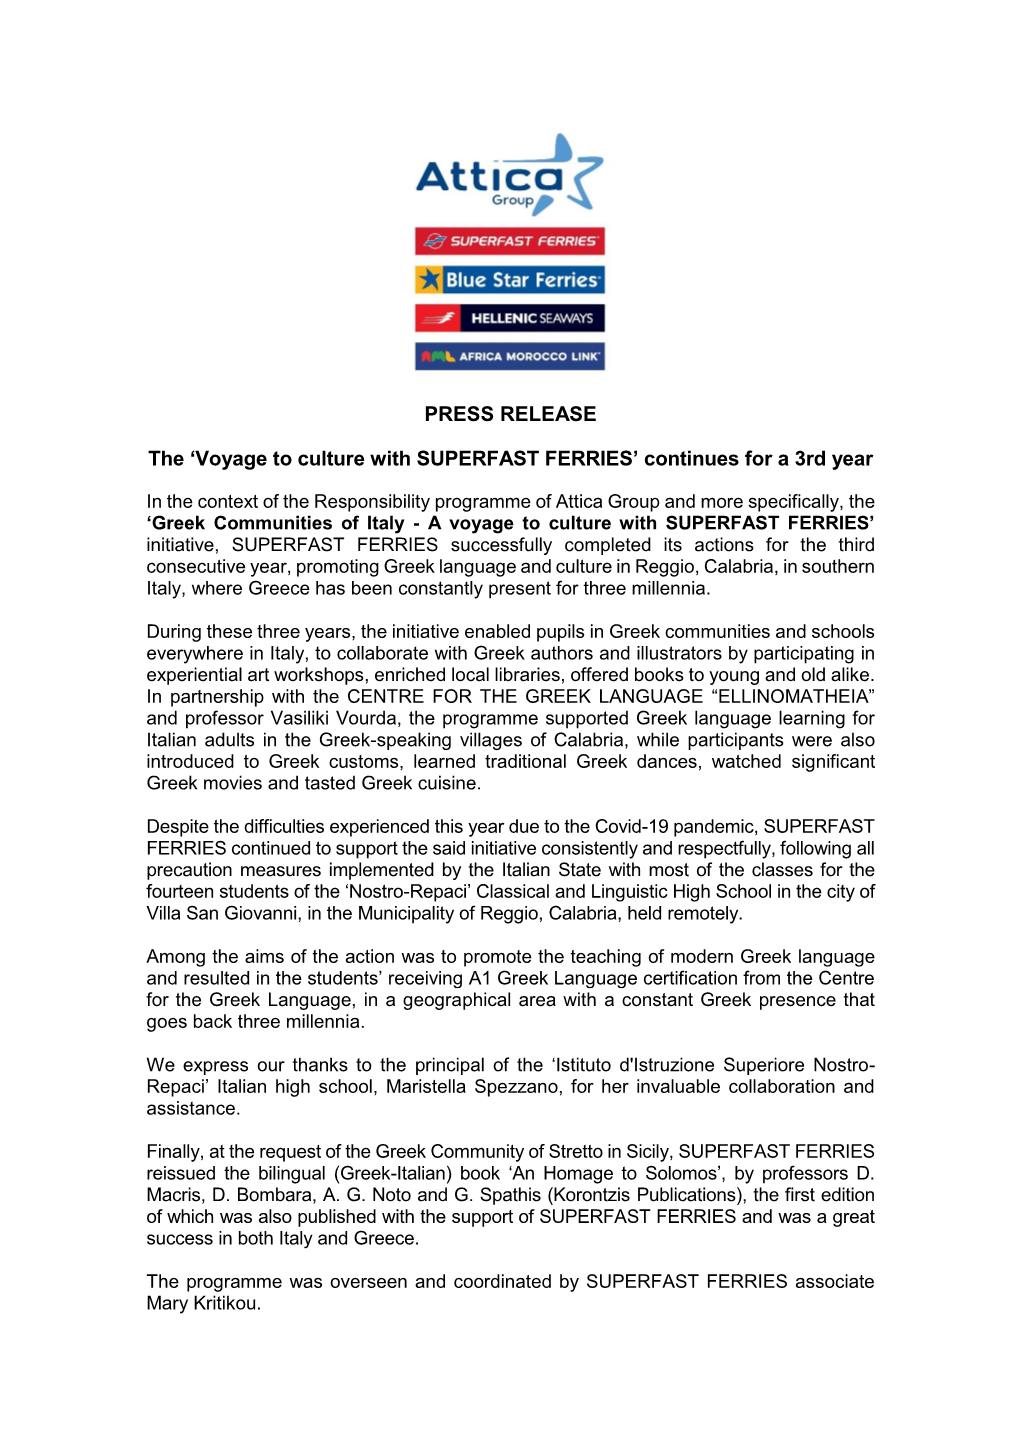 PRESS RELEASE the 'Voyage to Culture with SUPERFAST FERRIES' Continues for a 3Rd Year